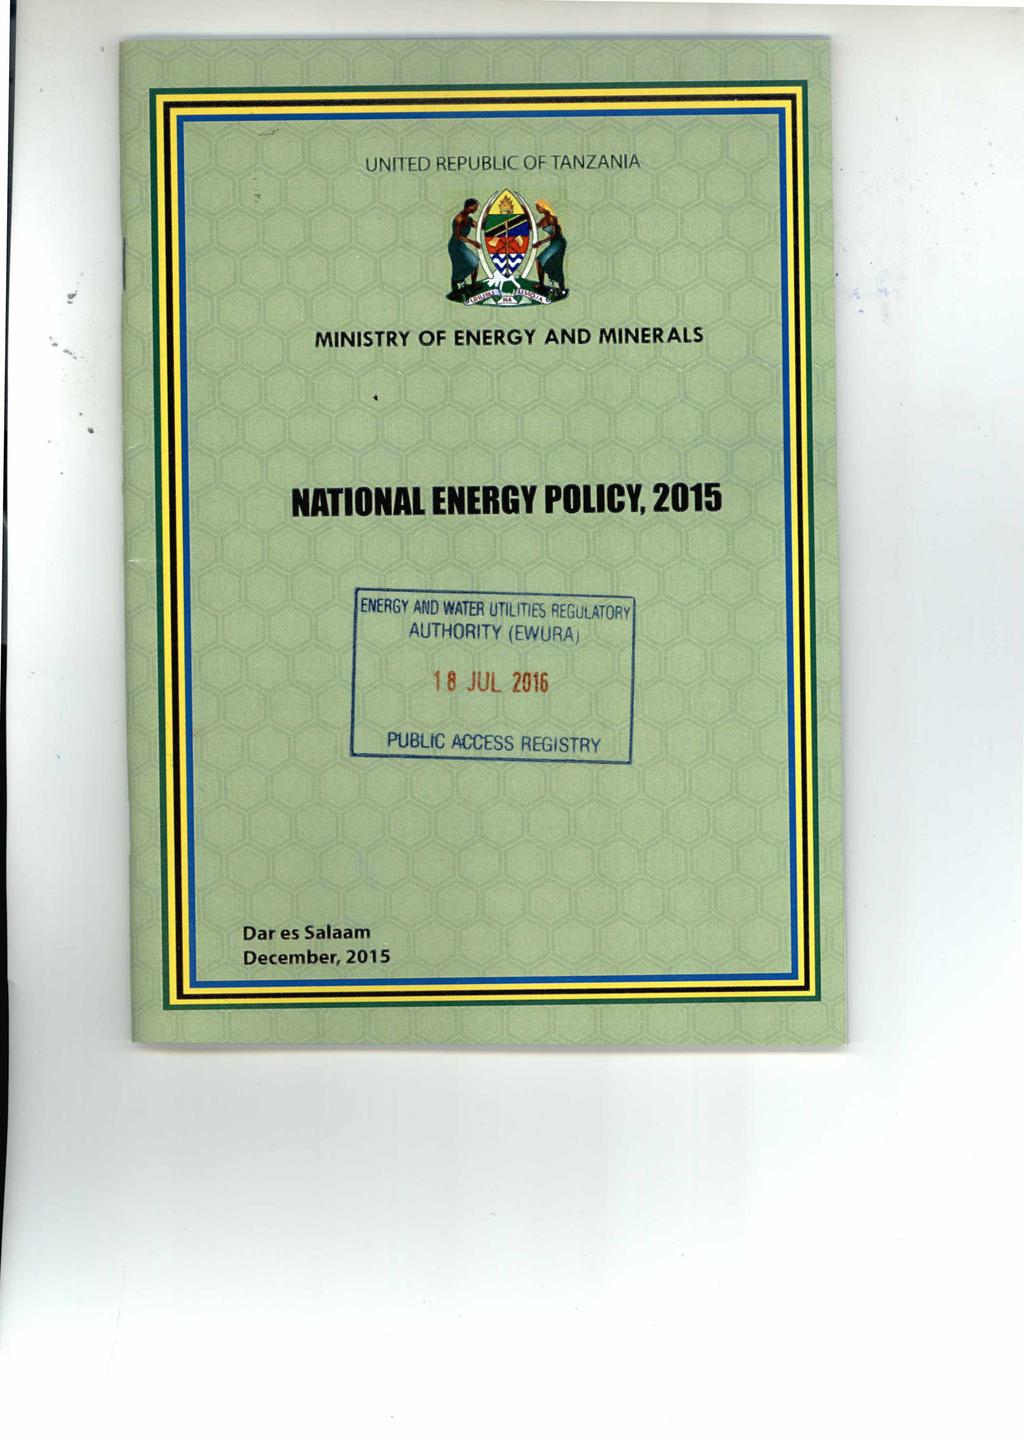 UNITED REPUBLIC OF TANZANIA MINISTRY OF ENERGY AND MINERALS NATIONAL ENERGY POLICY, 2015 'ENERGY AND WATER